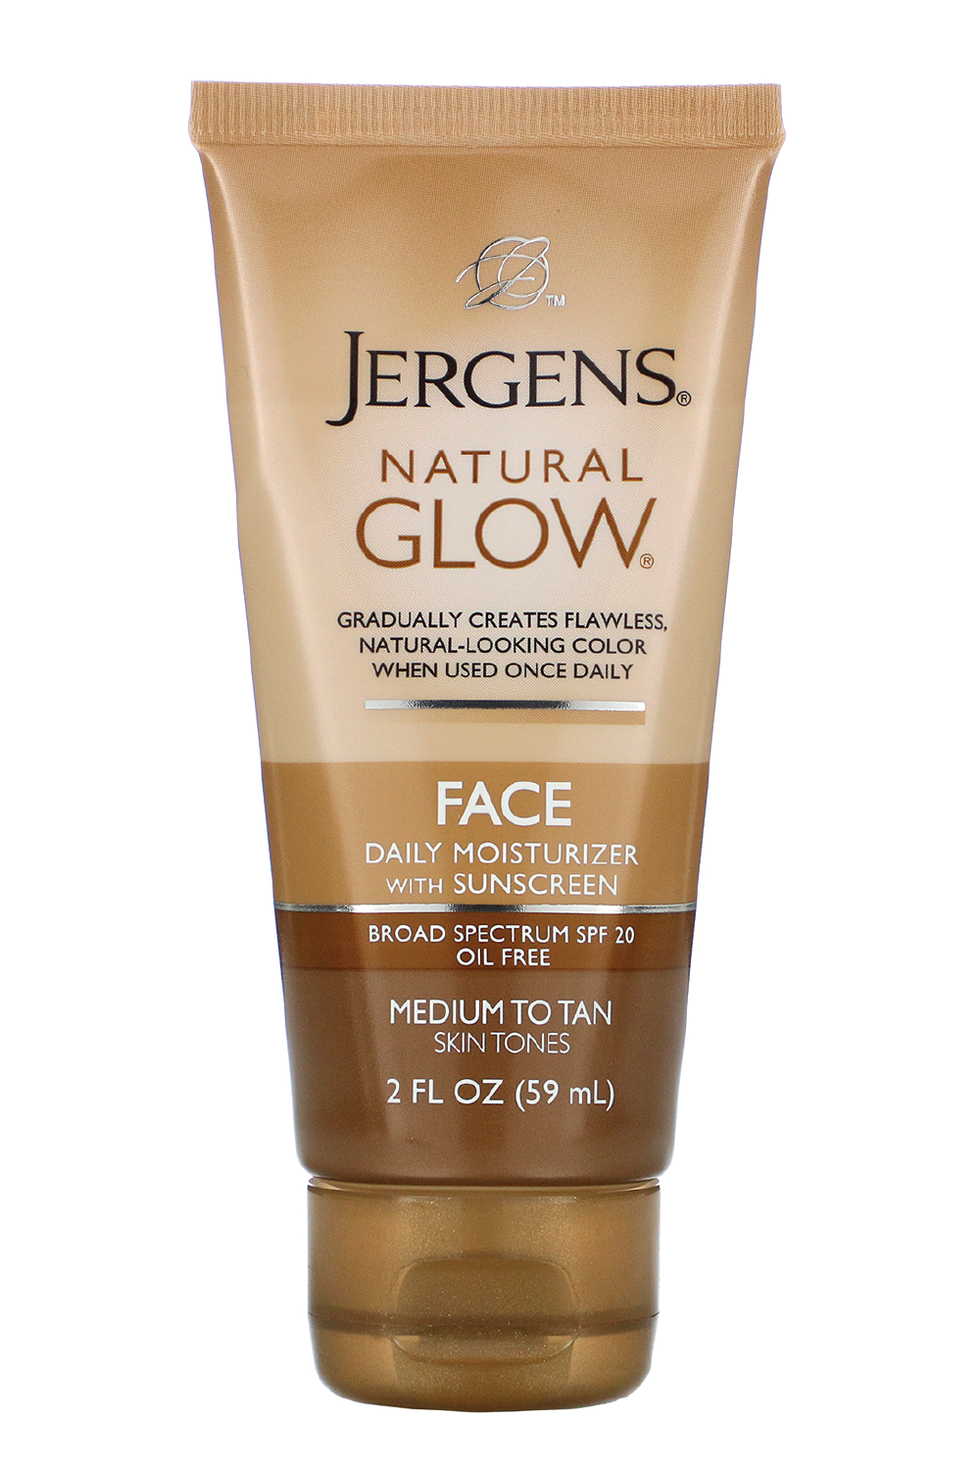 Natural Glow Self Tanner Face Moisturizer